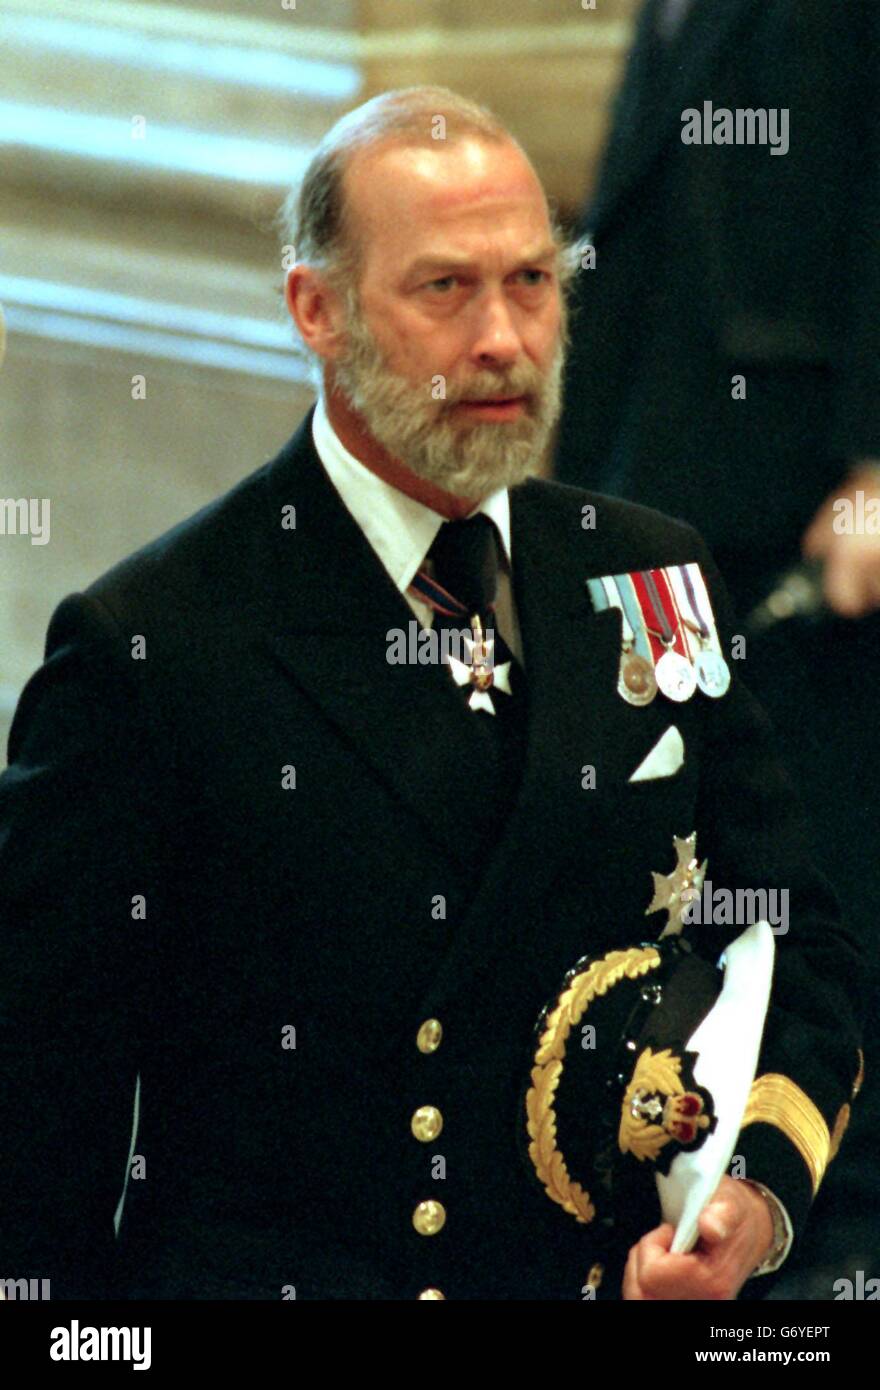 Prince Michael of Kent arrives at St. Paul's Cathedral for the service of Thanks Giving commemorating the 50th Anniversary of VE Day. Stock Photo